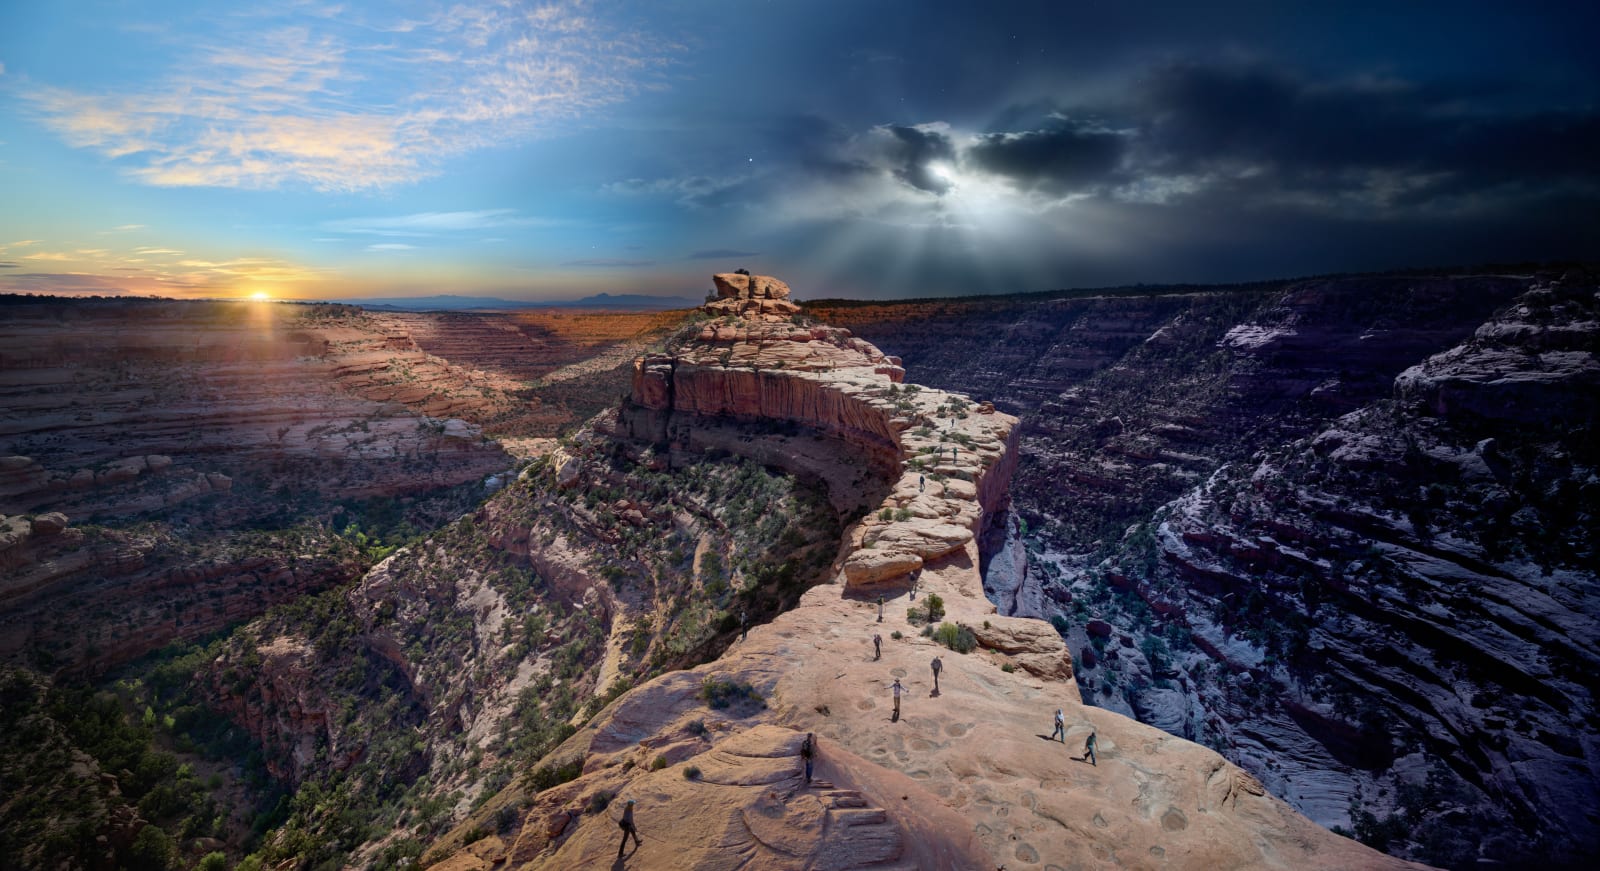 Stephen Wilkes, Bears Ears National Monument, Day to Night™, 2022